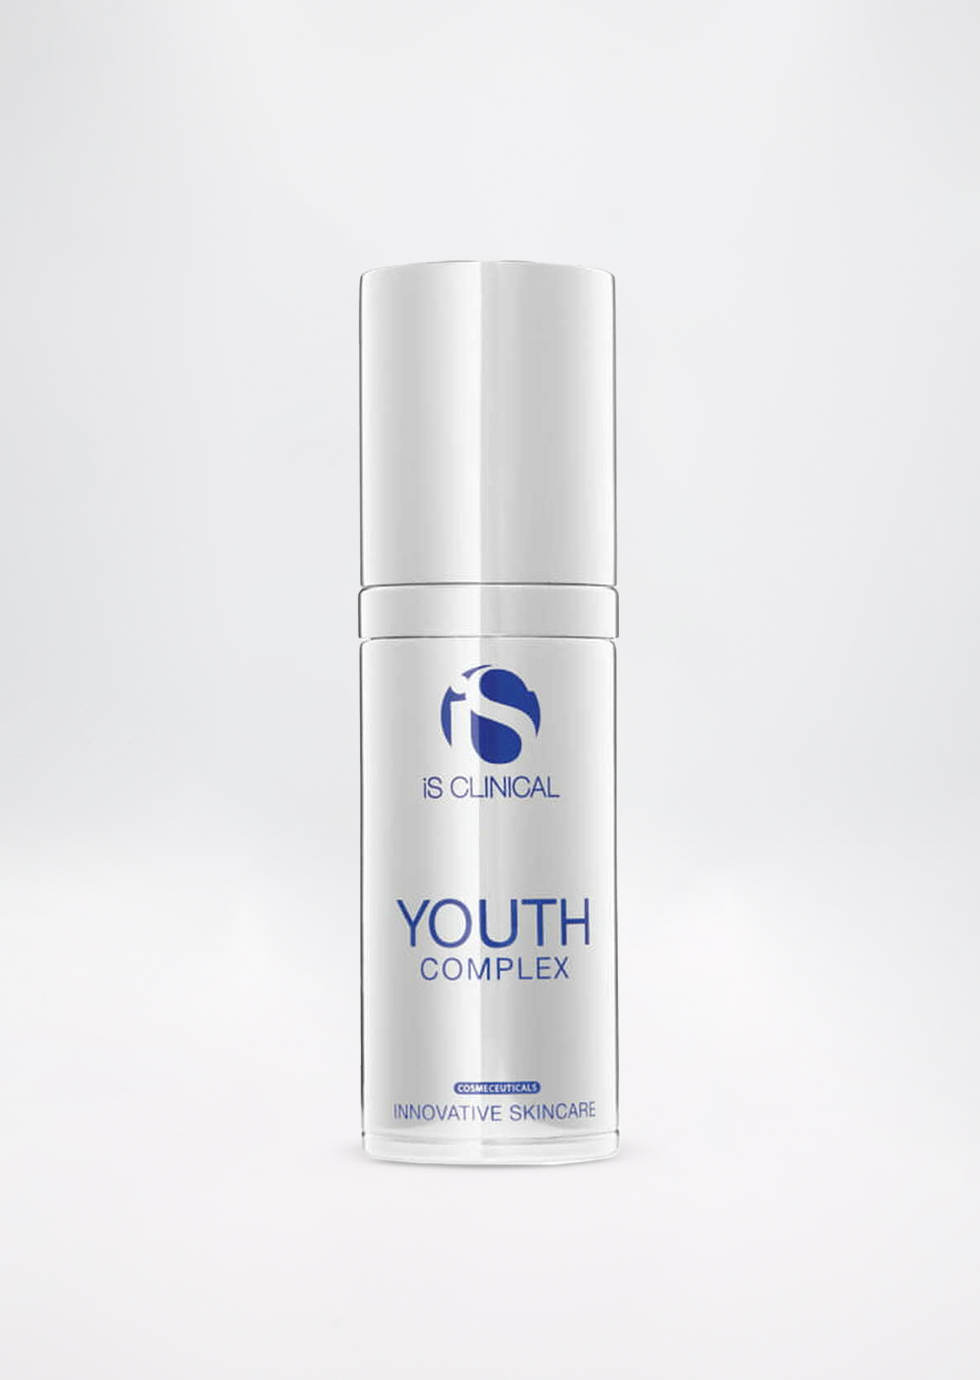 iS Youth Complex 30g